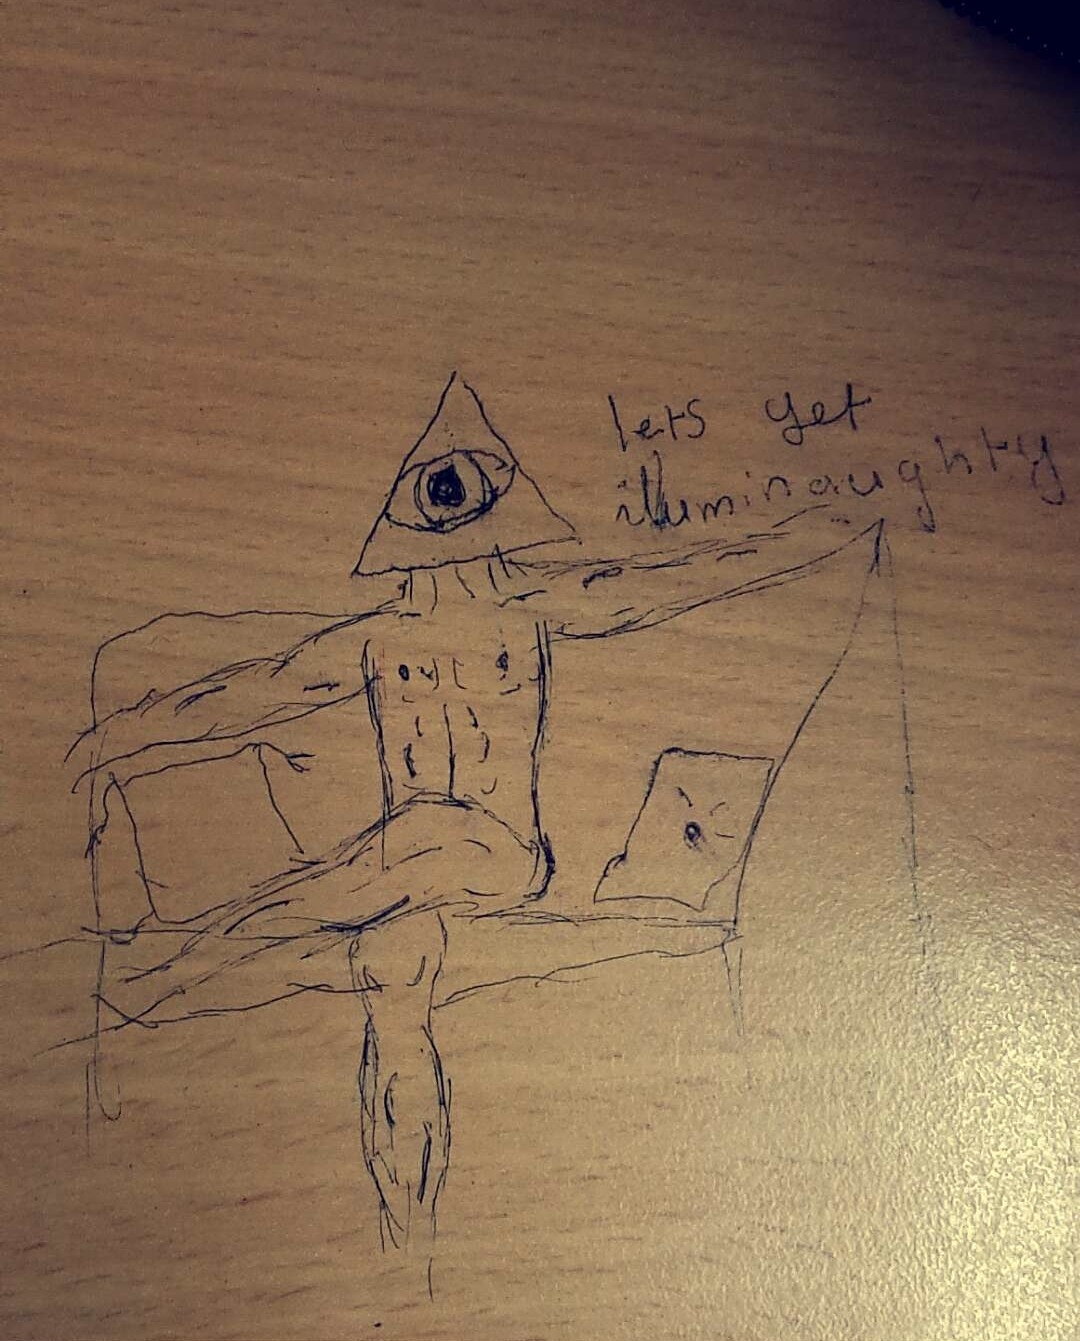 Found this on a table at school today...